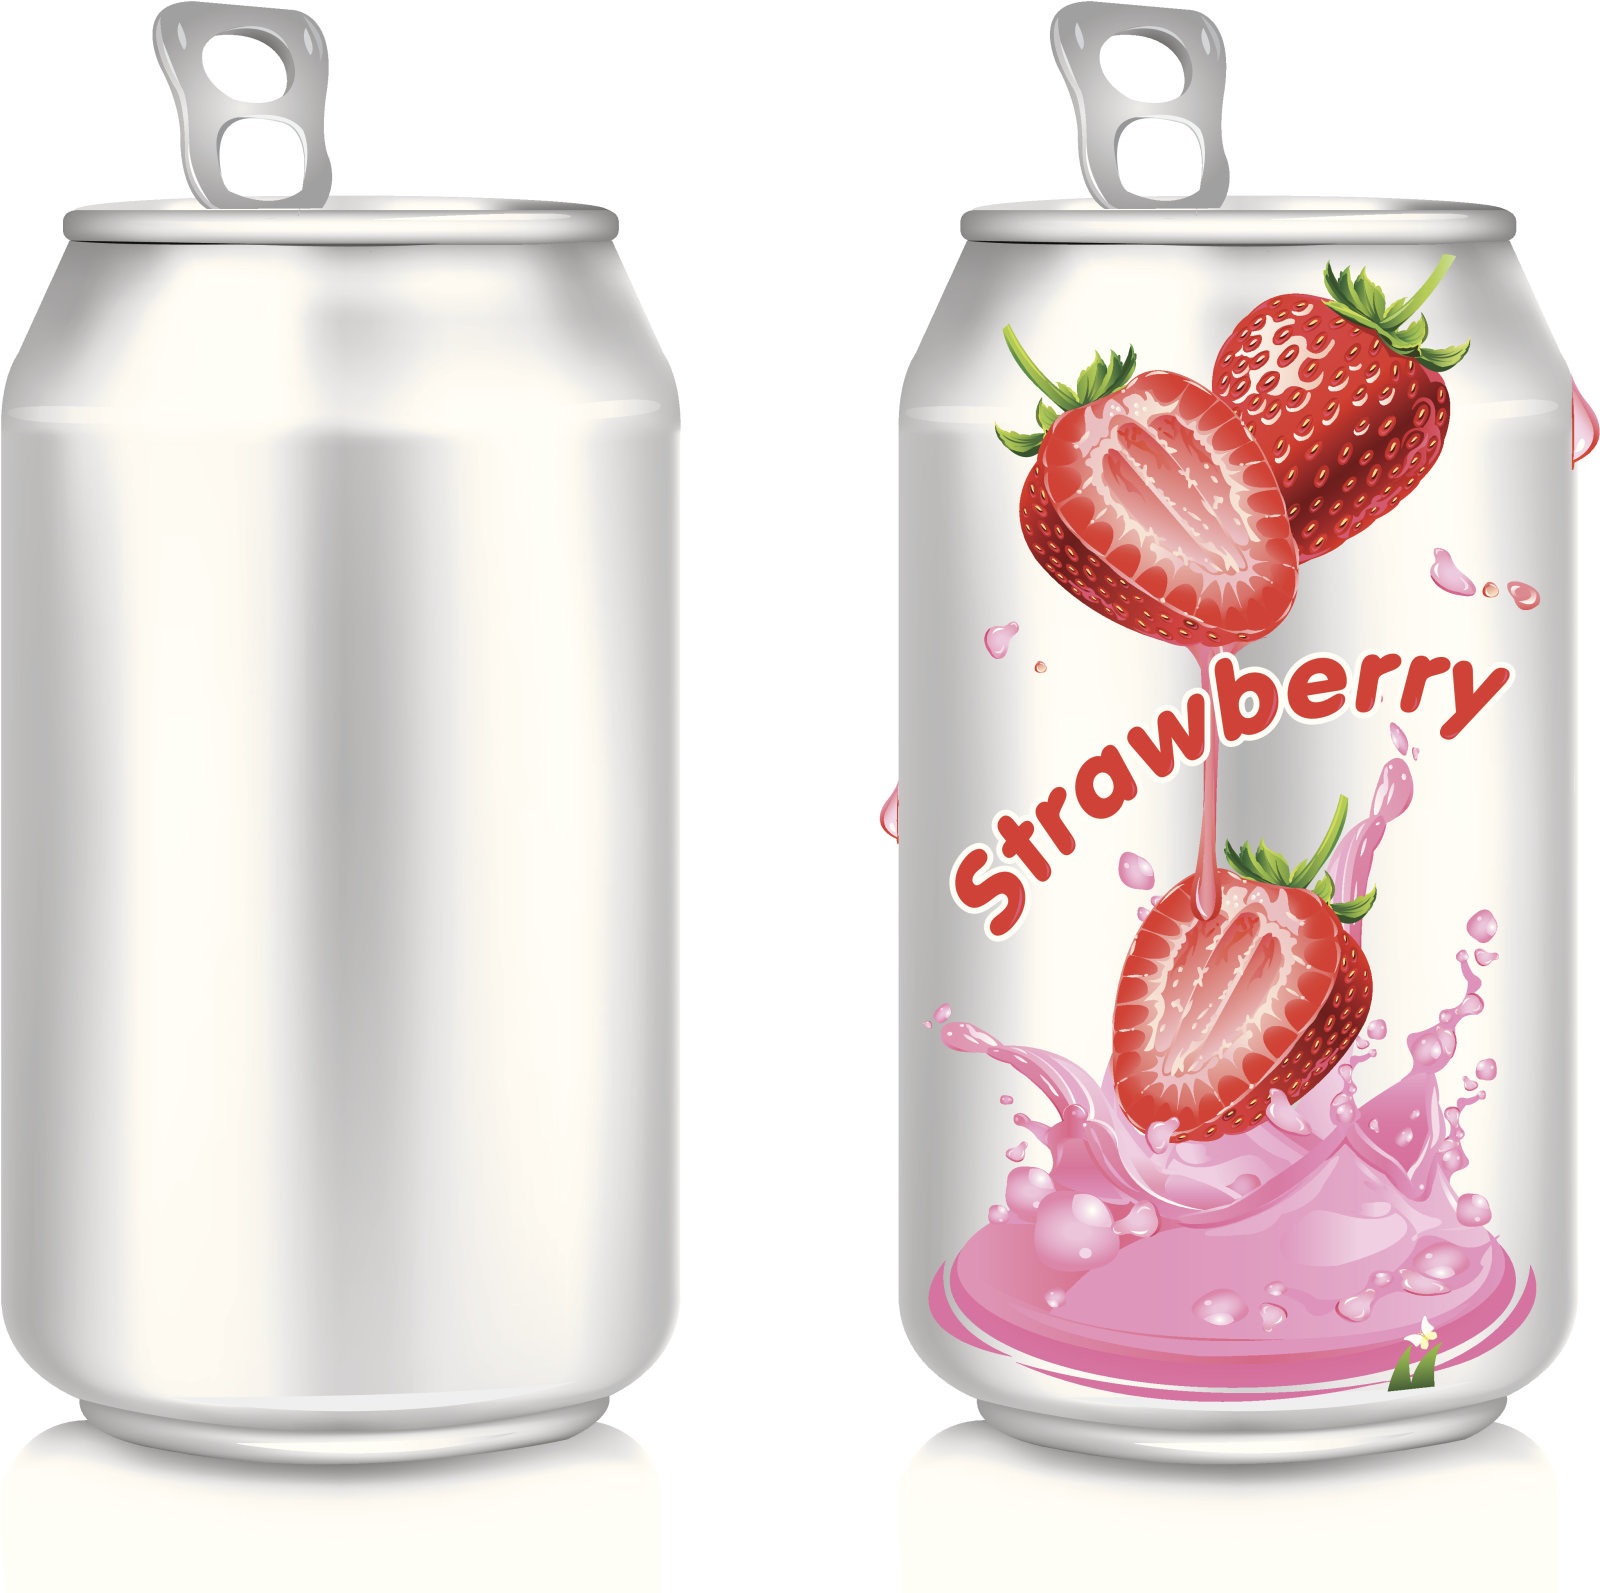 Round Shape Beverage Aluminum Drinking Open Cans 355ml STD For Juice Environmental Protection